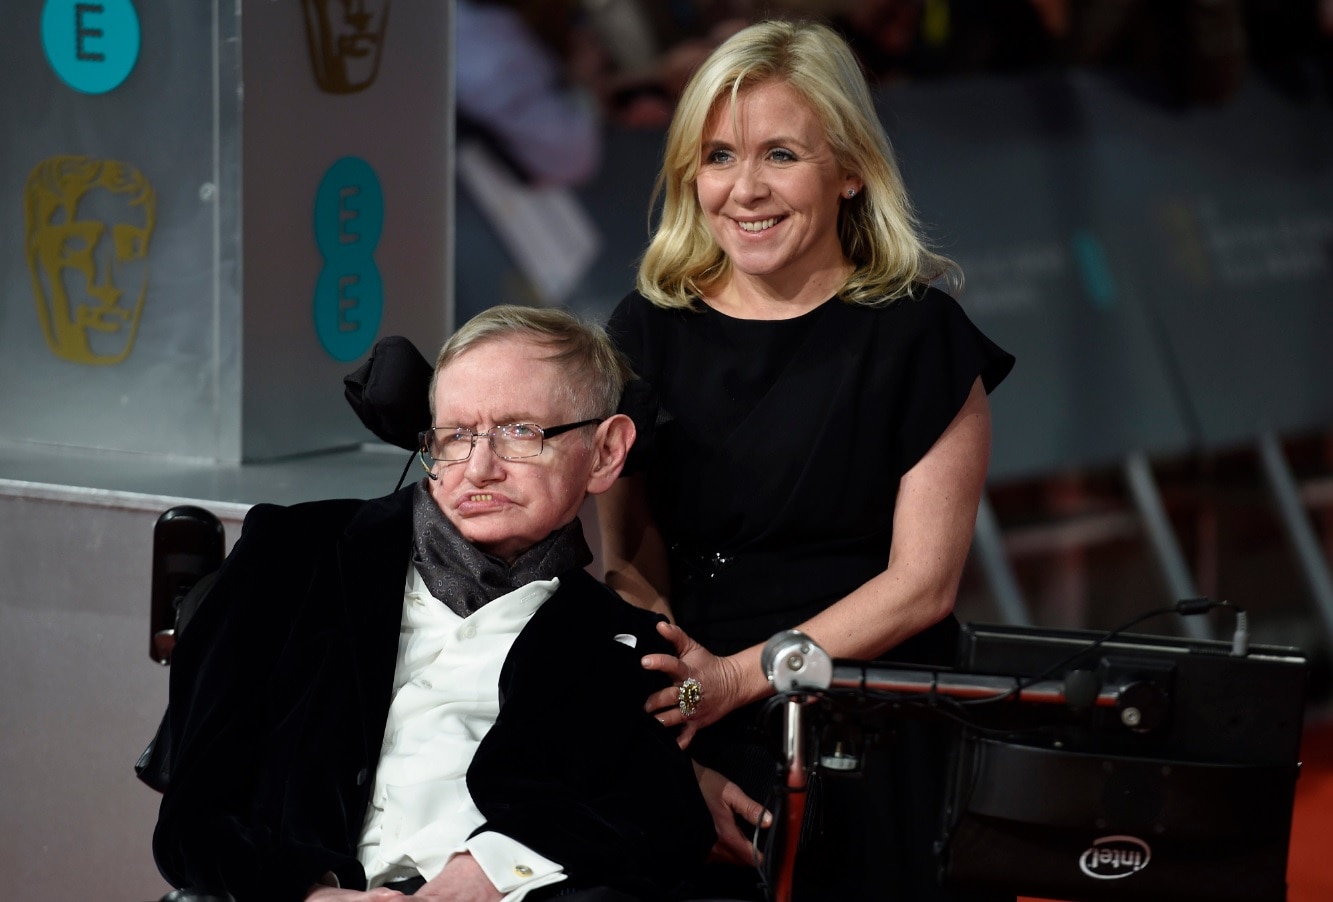 British scientist Stephen Hawking (L) and his daughter Lucy Hawking (R) arrive on the red carpet for the 2015 British Academy Film Awards 